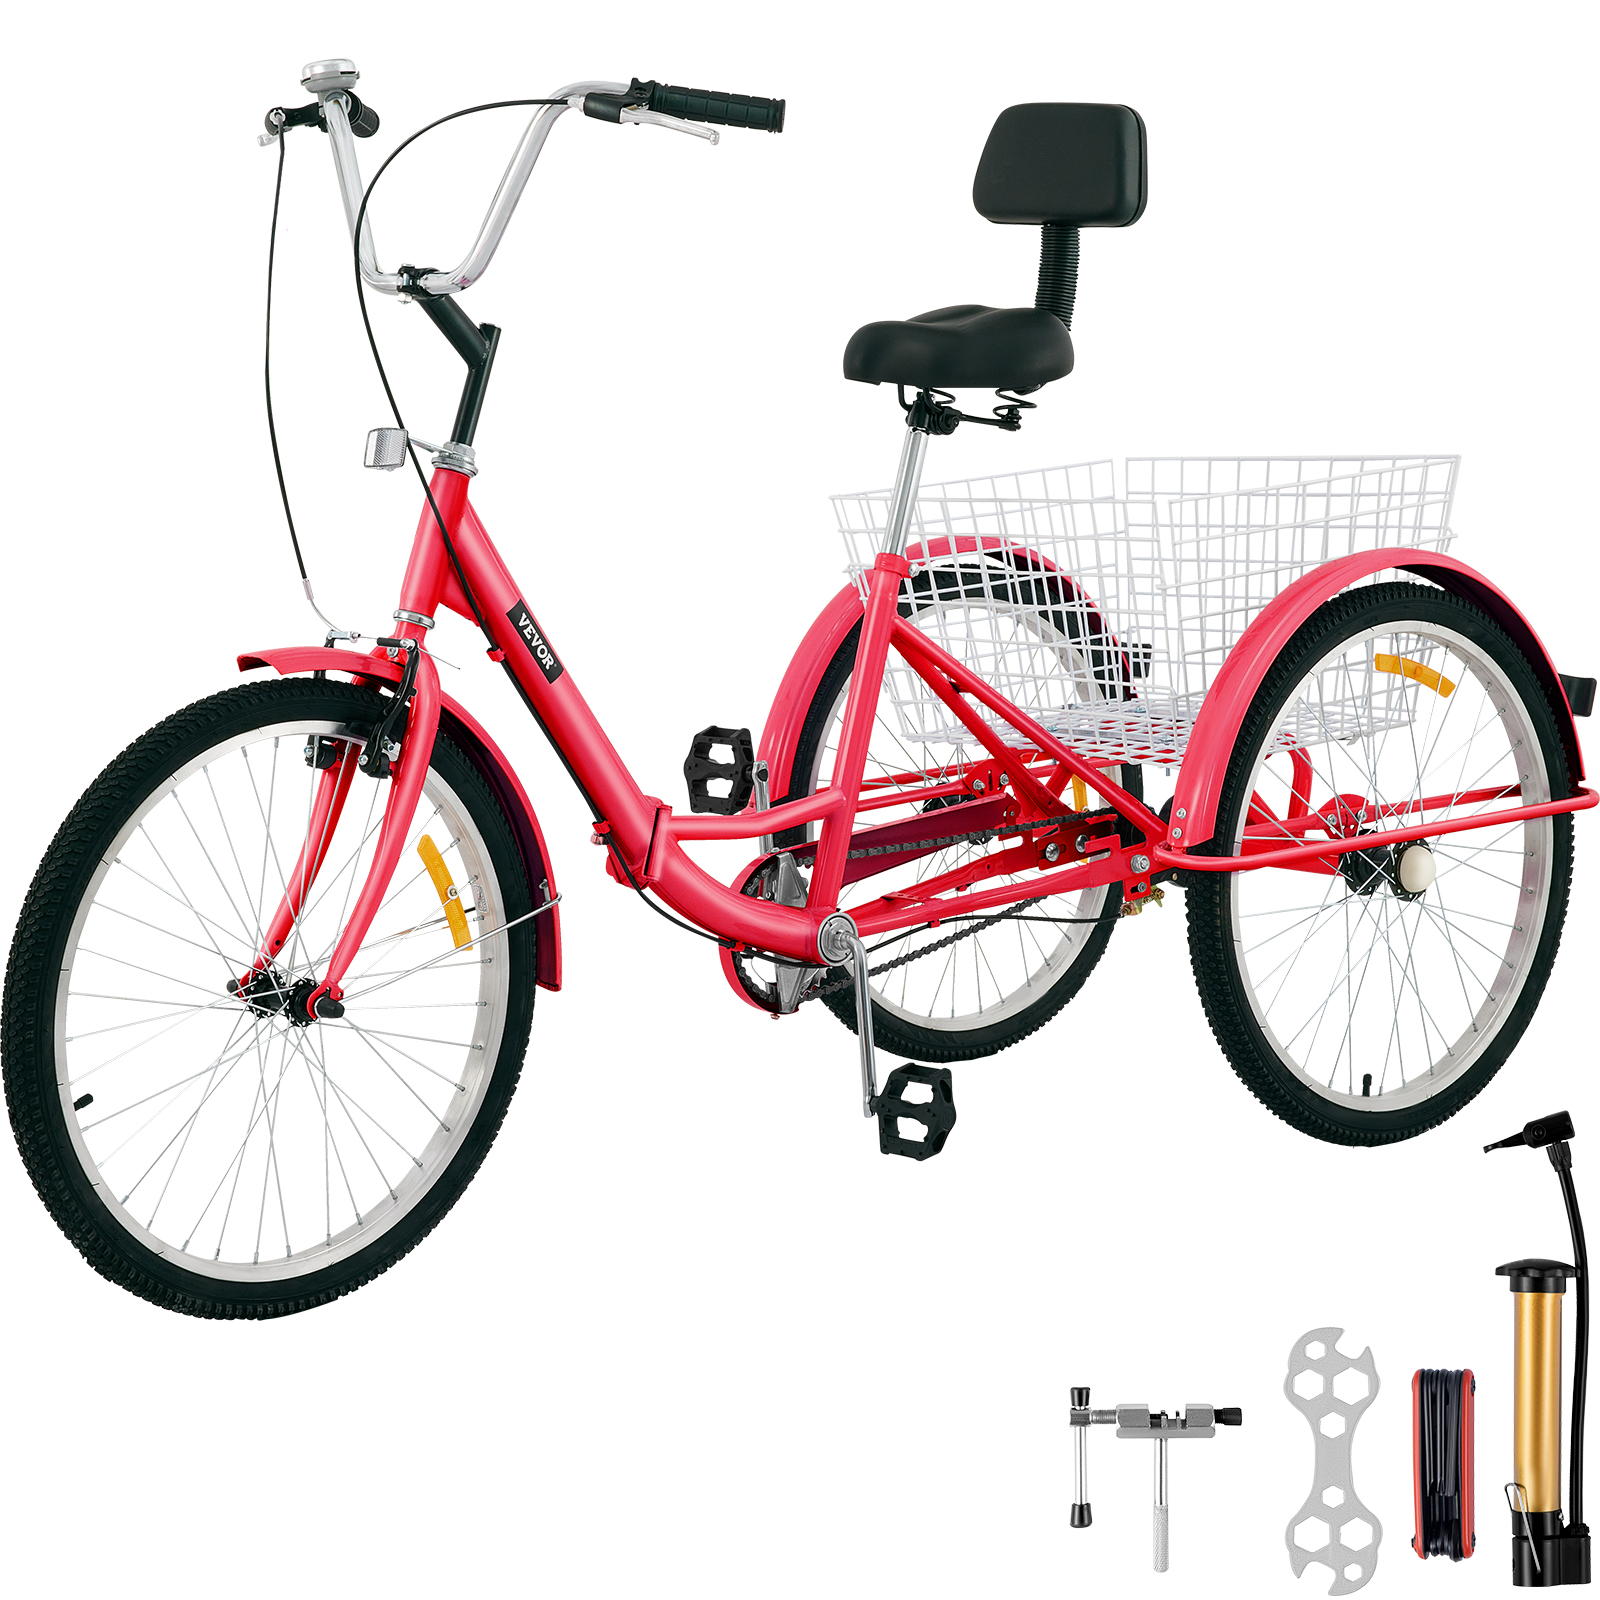 VEVOR Foldable Tricycle 24 inch Wheels,1-Speed Red Trike, 3 Wheels Colorful Bike with Basket, Portable and Foldable Bicycle for Adults Exercise Shopping Picnic Outdoor Activities - image 1 of 9